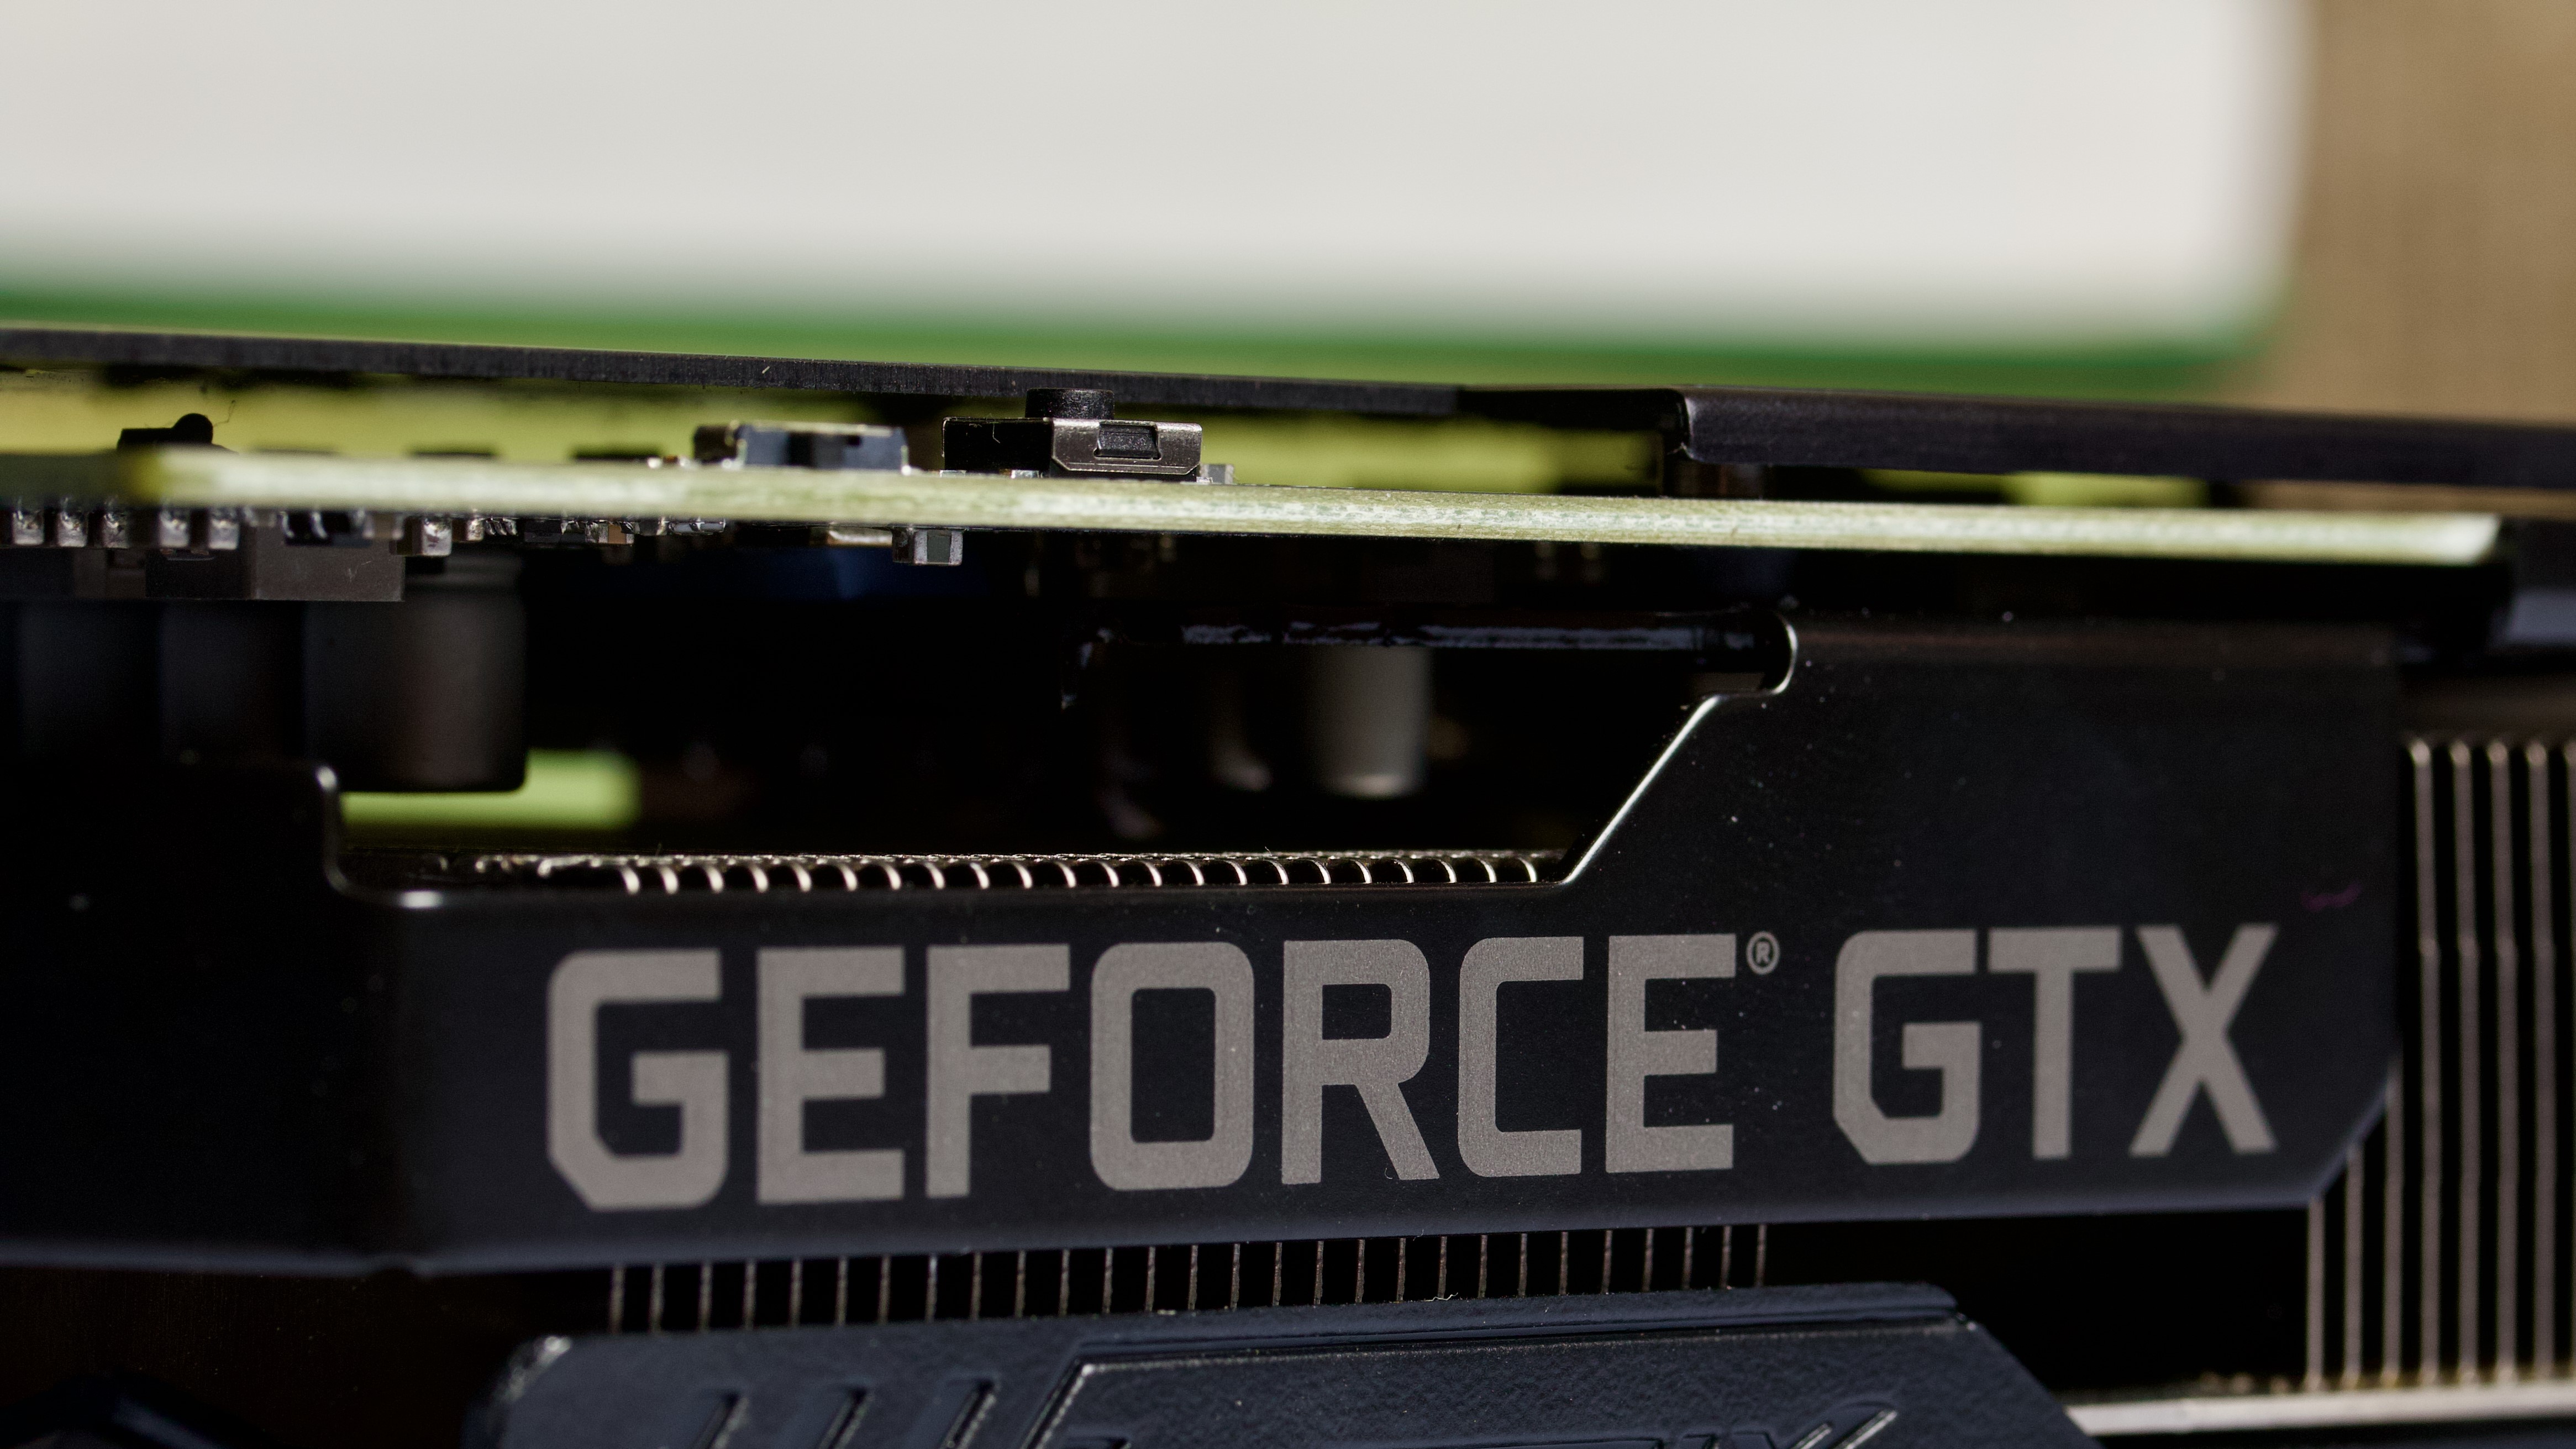 The GTX 1650 is now the most commonly used GPU among users | PC Gamer